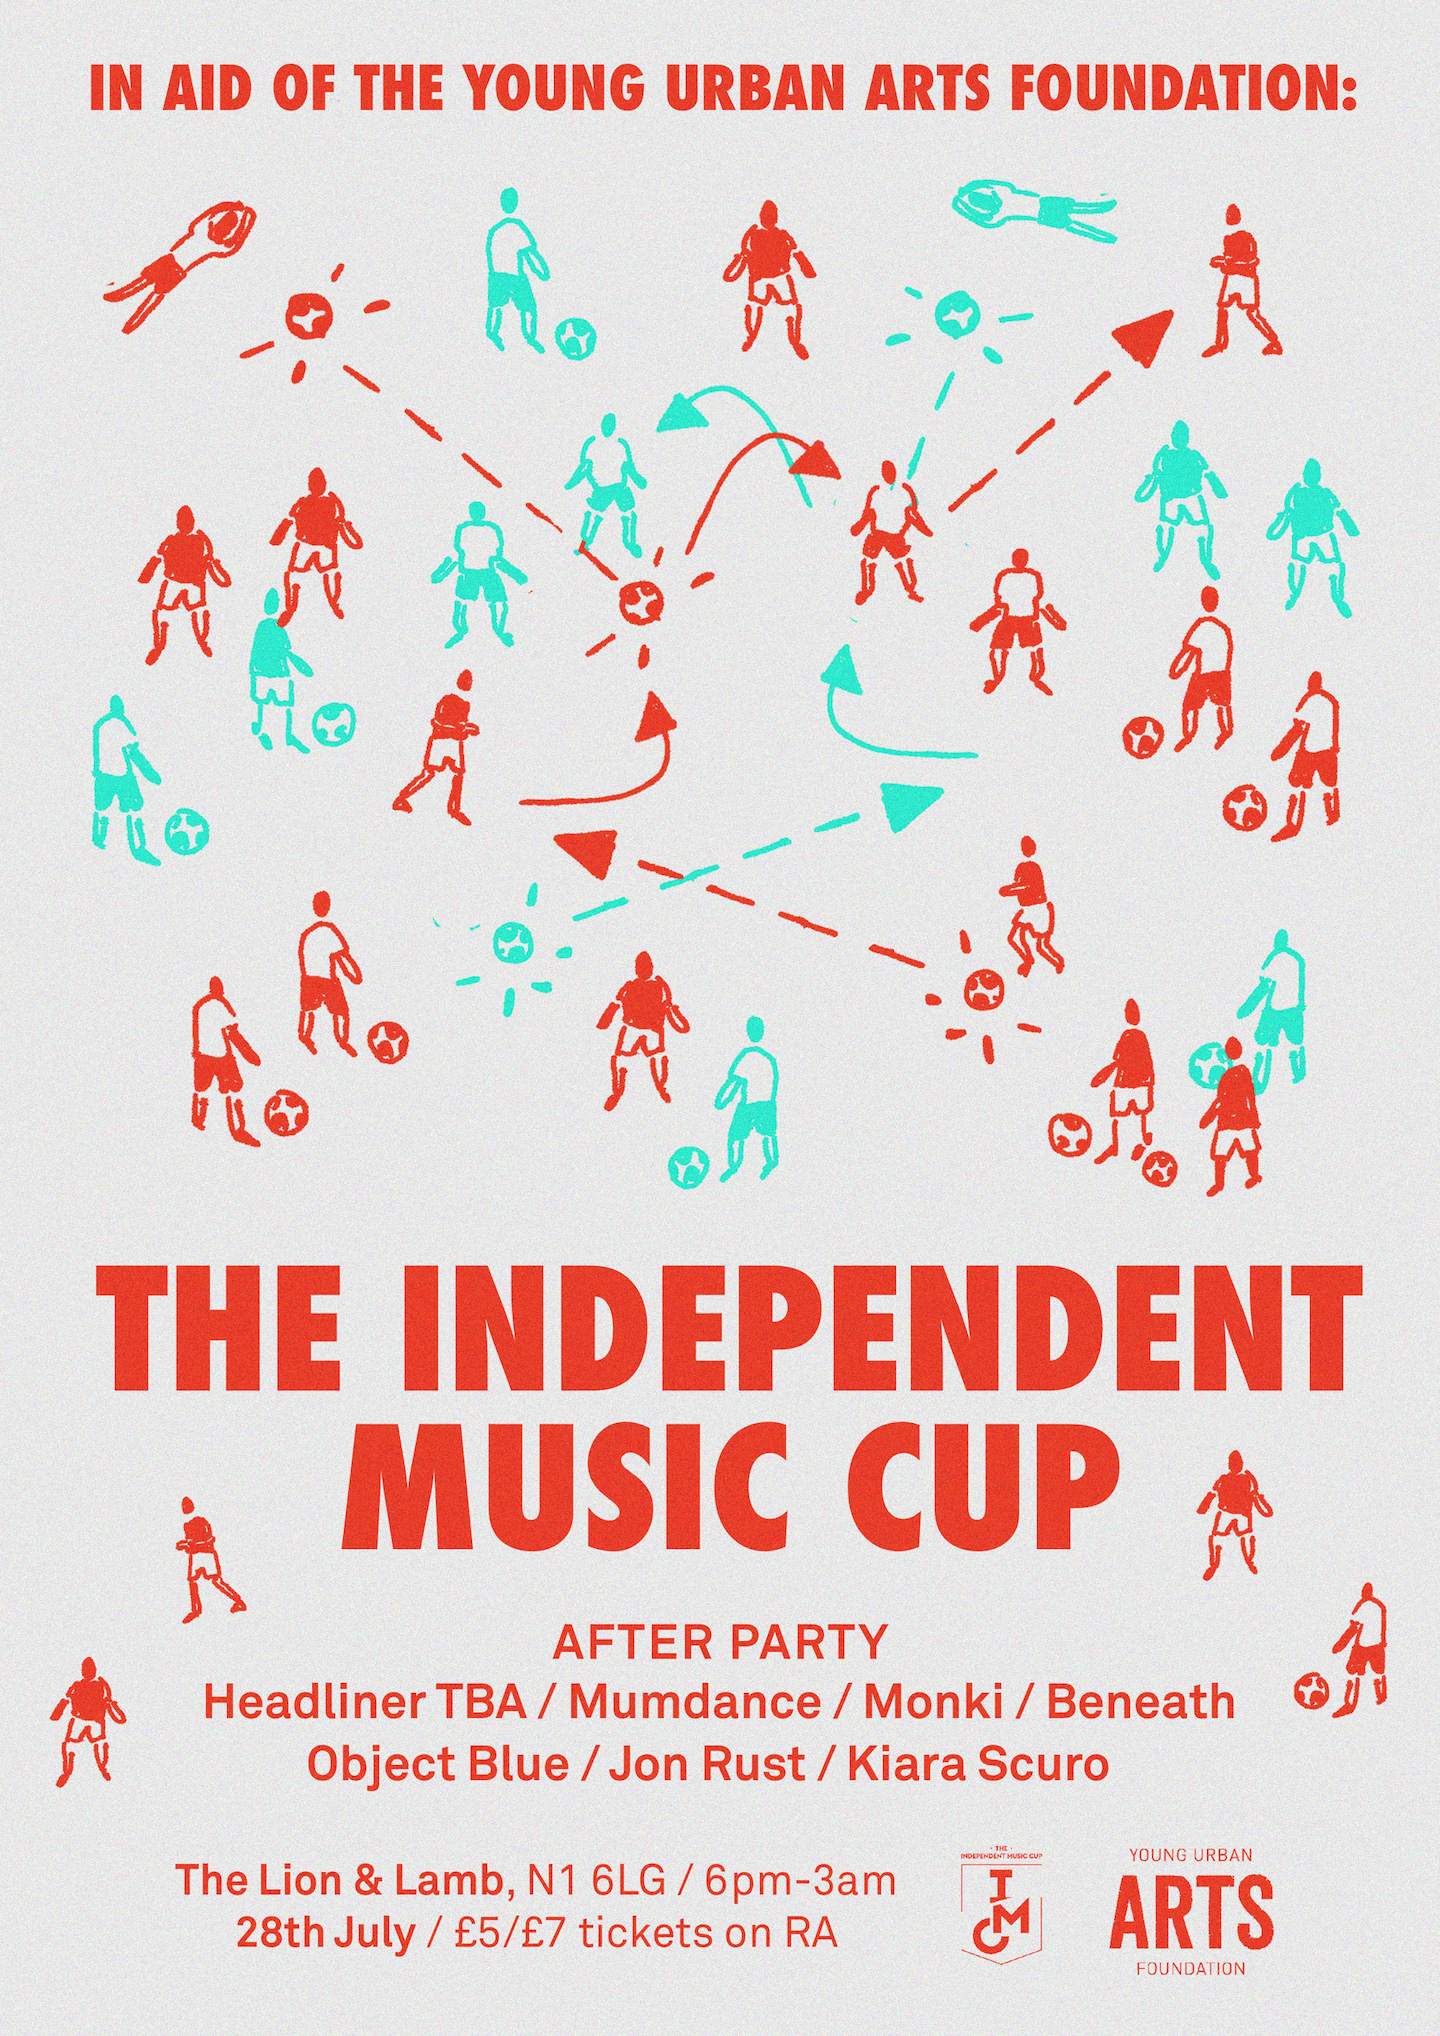 RA to host Independent Music Cup afterparty with Mumdance, Monki and a special guest image